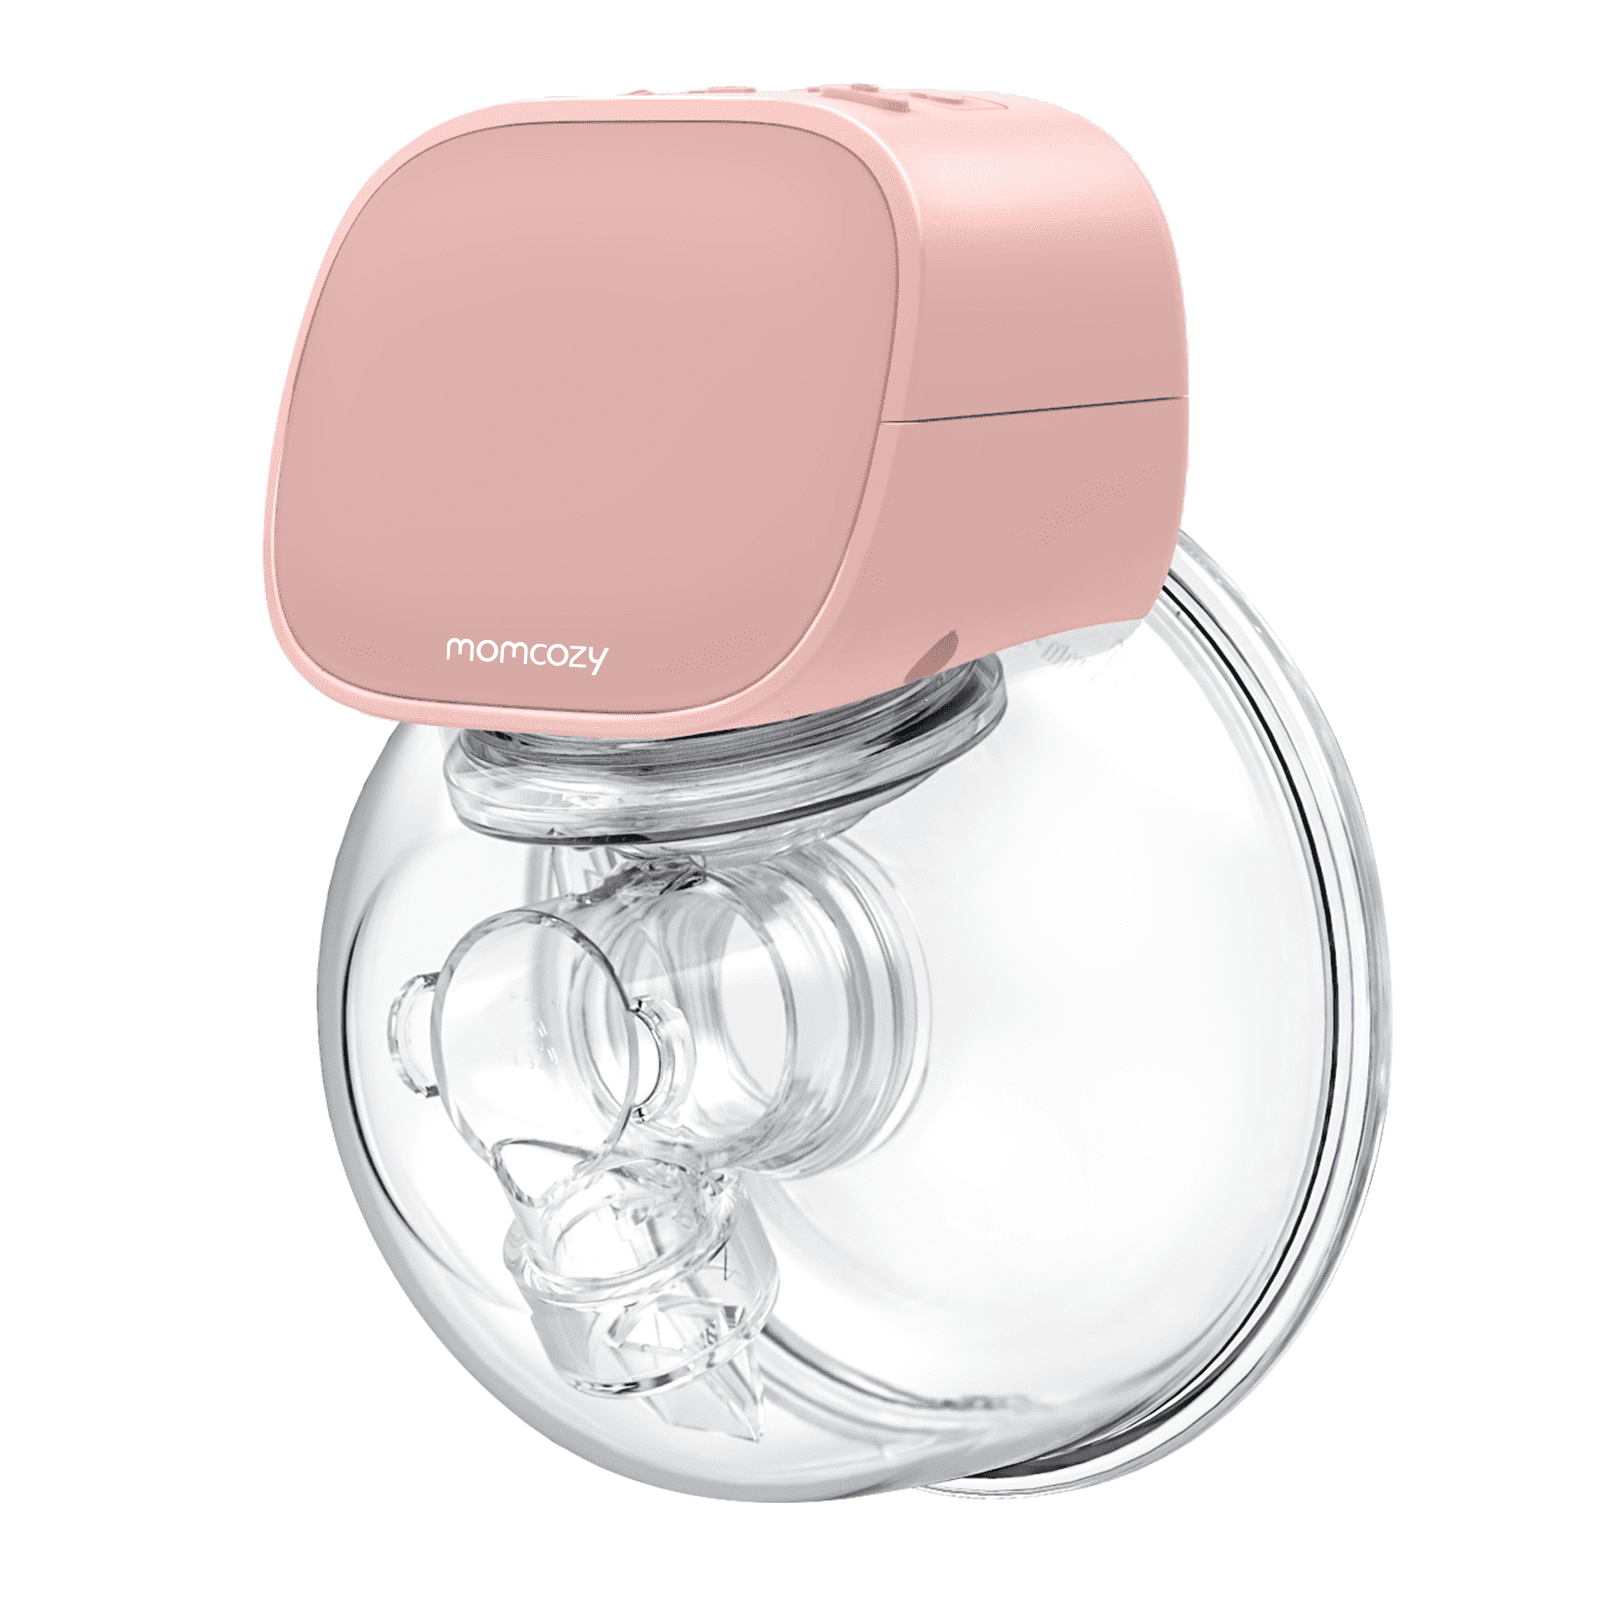 Bwcece Wearable Breast Pump,Quiet&Hands-Free Breastpump Portable Electric Breastfeeding Pump,Rechargeable Milk Pump Wireless,Strong Suction Power with 2 Mode & 5 Levels,24mm 1PCS 